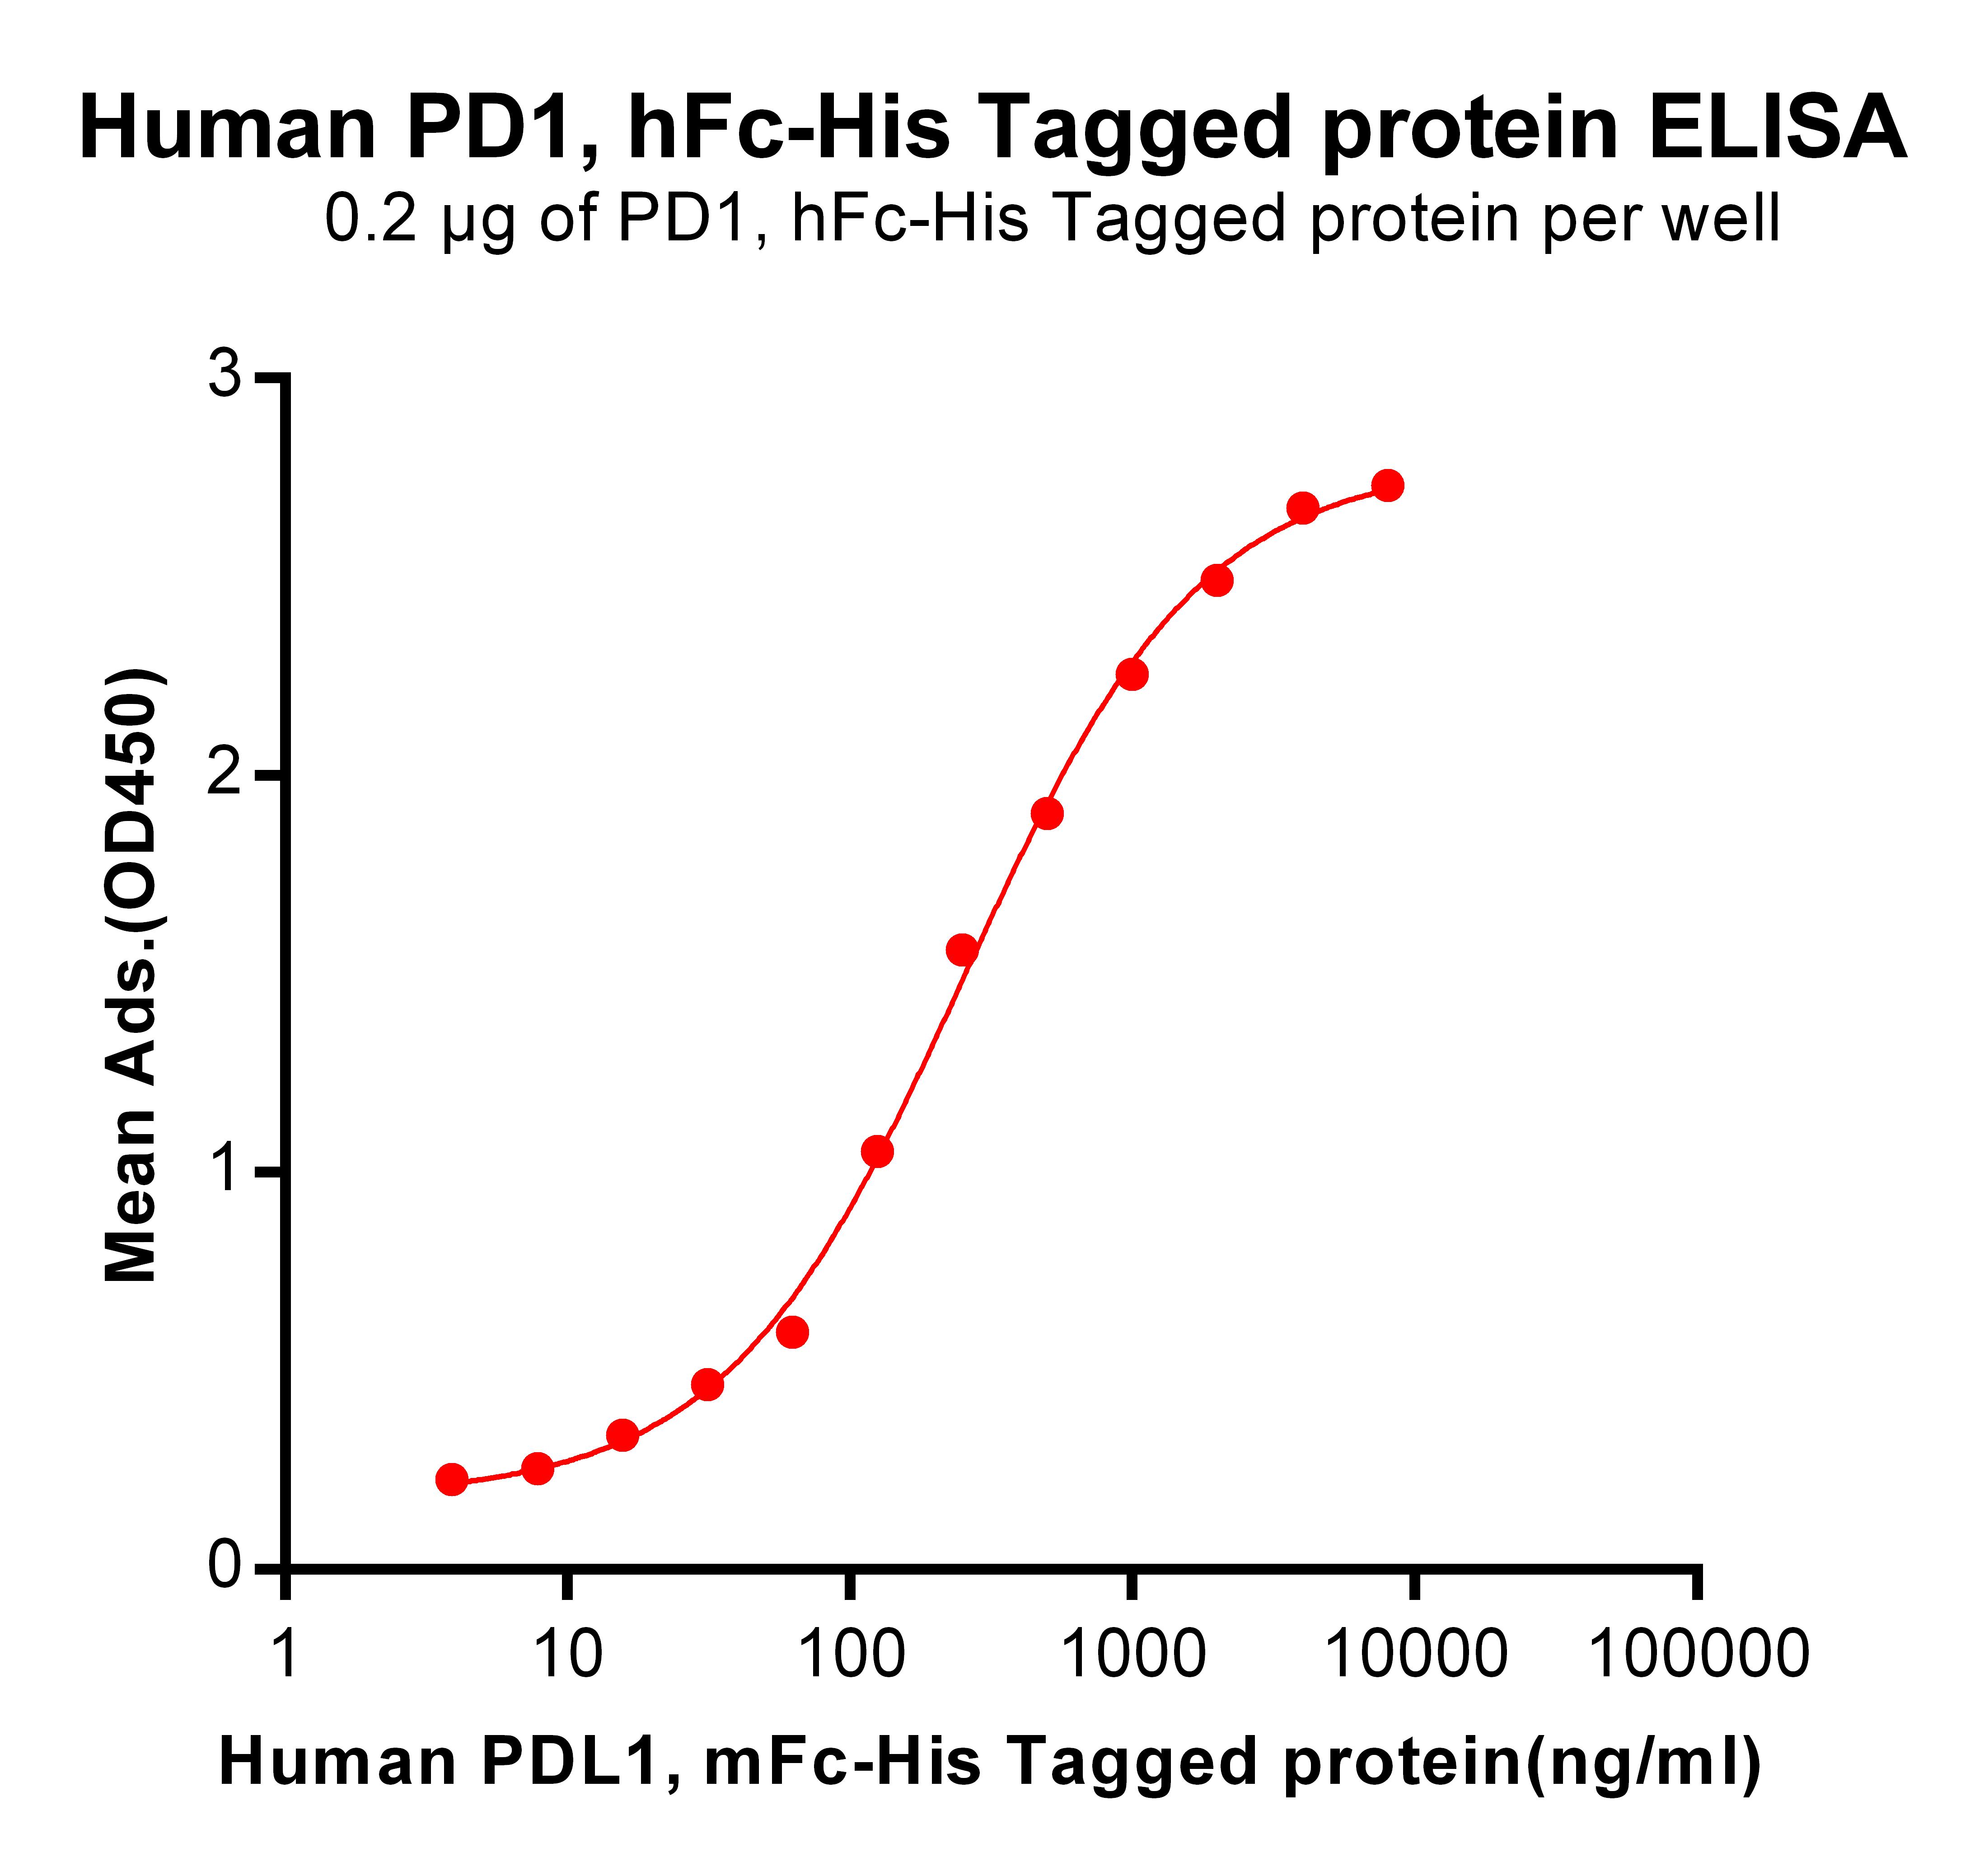 Figure 2. ELISA plate pre-coated by 2 µg/ml (100 µl/well) Human PD1, hFc-His tagged protein  can bind Human PDL1, mFc-His tagged protein  in a linear range of 62.5-251.1 ng/ml.